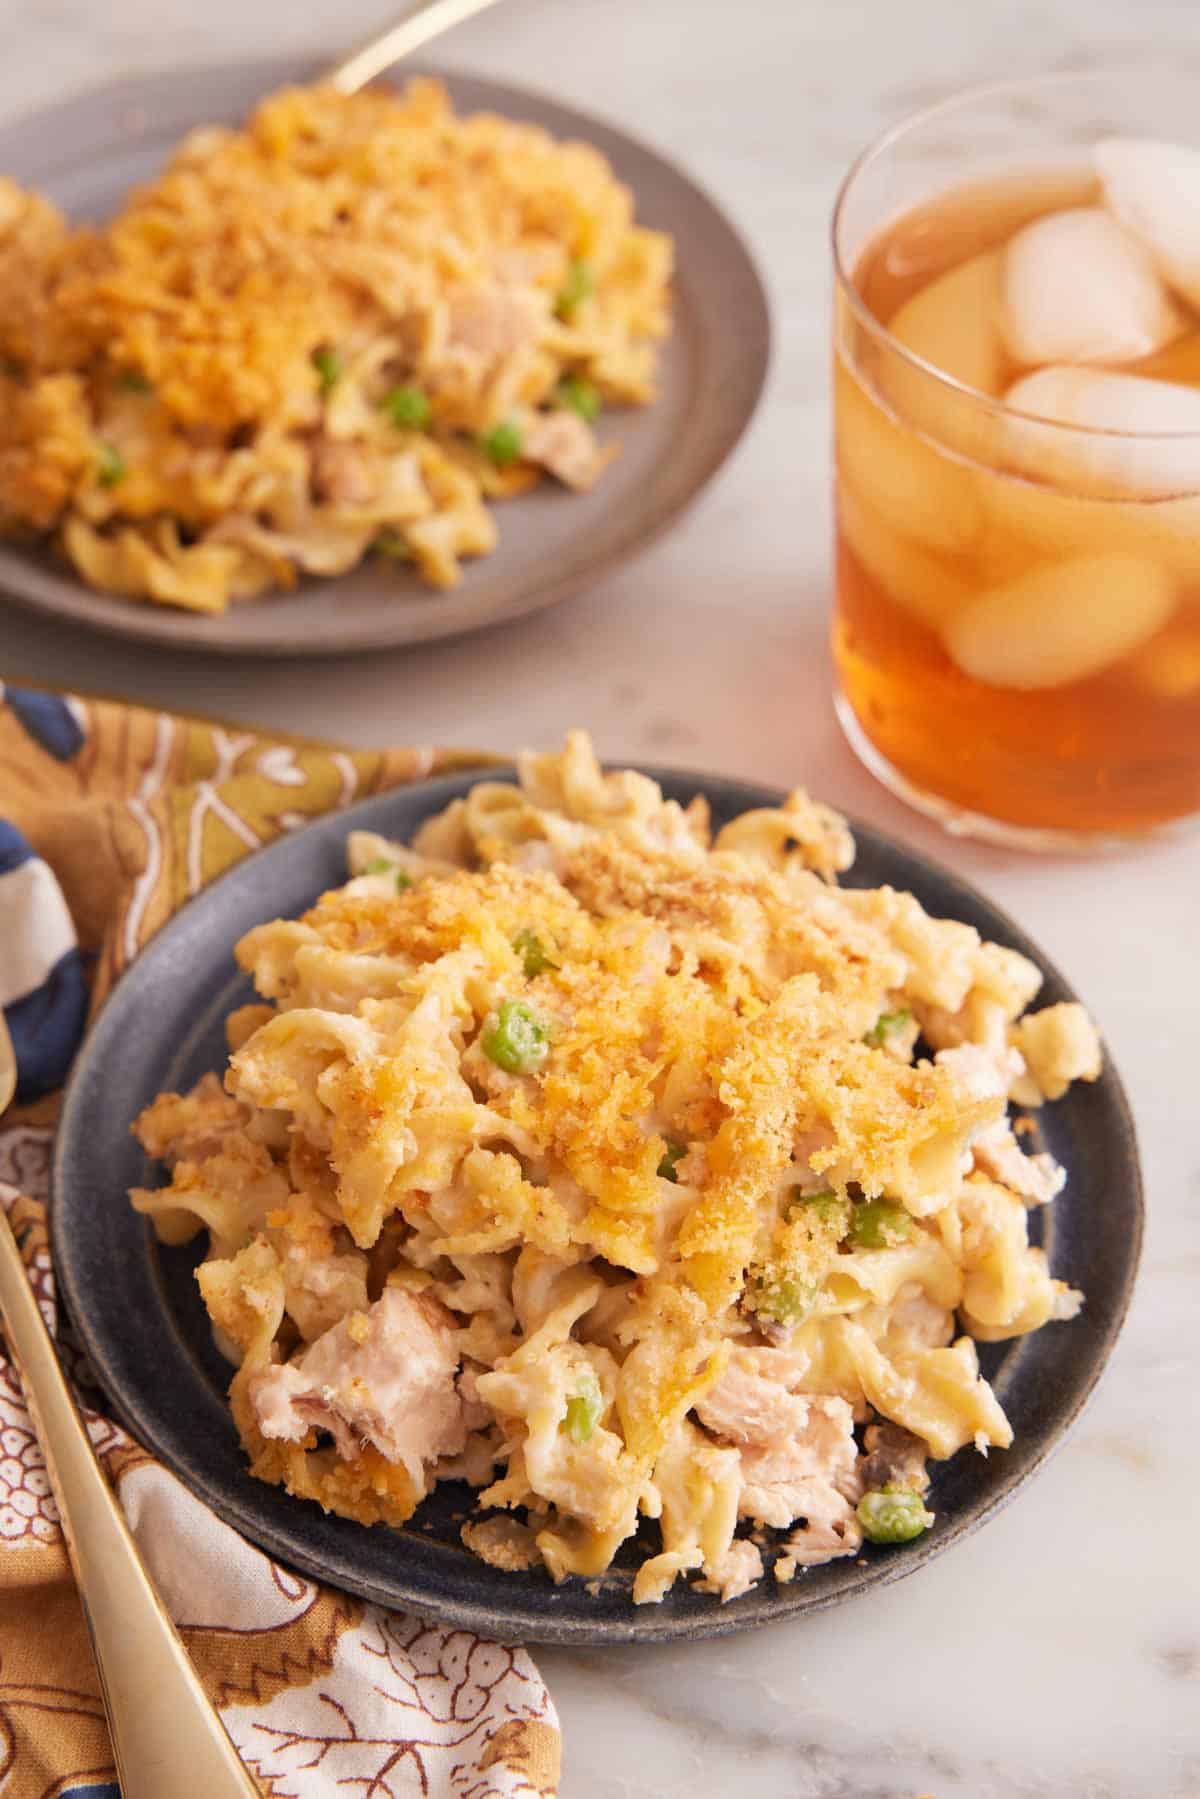 Two plates of tuna casserole with a glass of iced drink on the side.